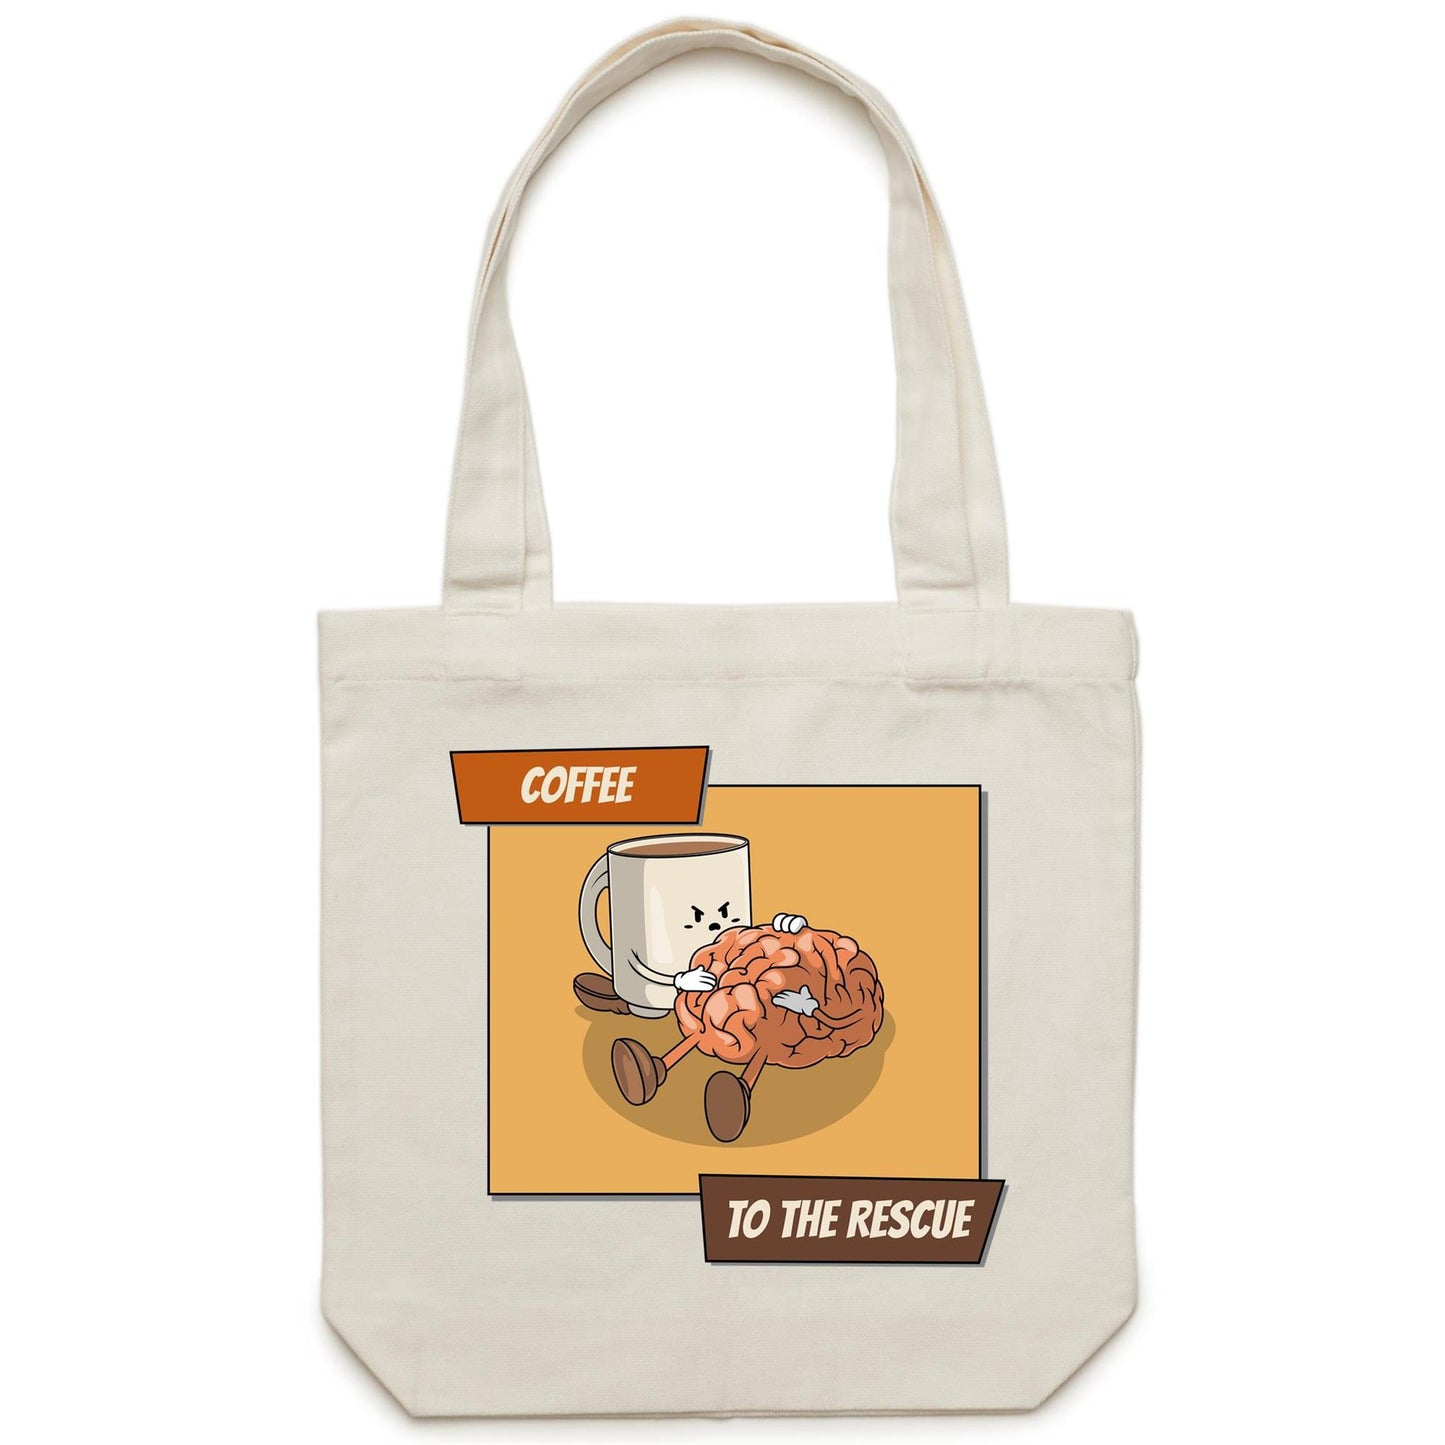 Coffee To The Rescue - Canvas Tote Bag Cream One Size Tote Bag Coffee